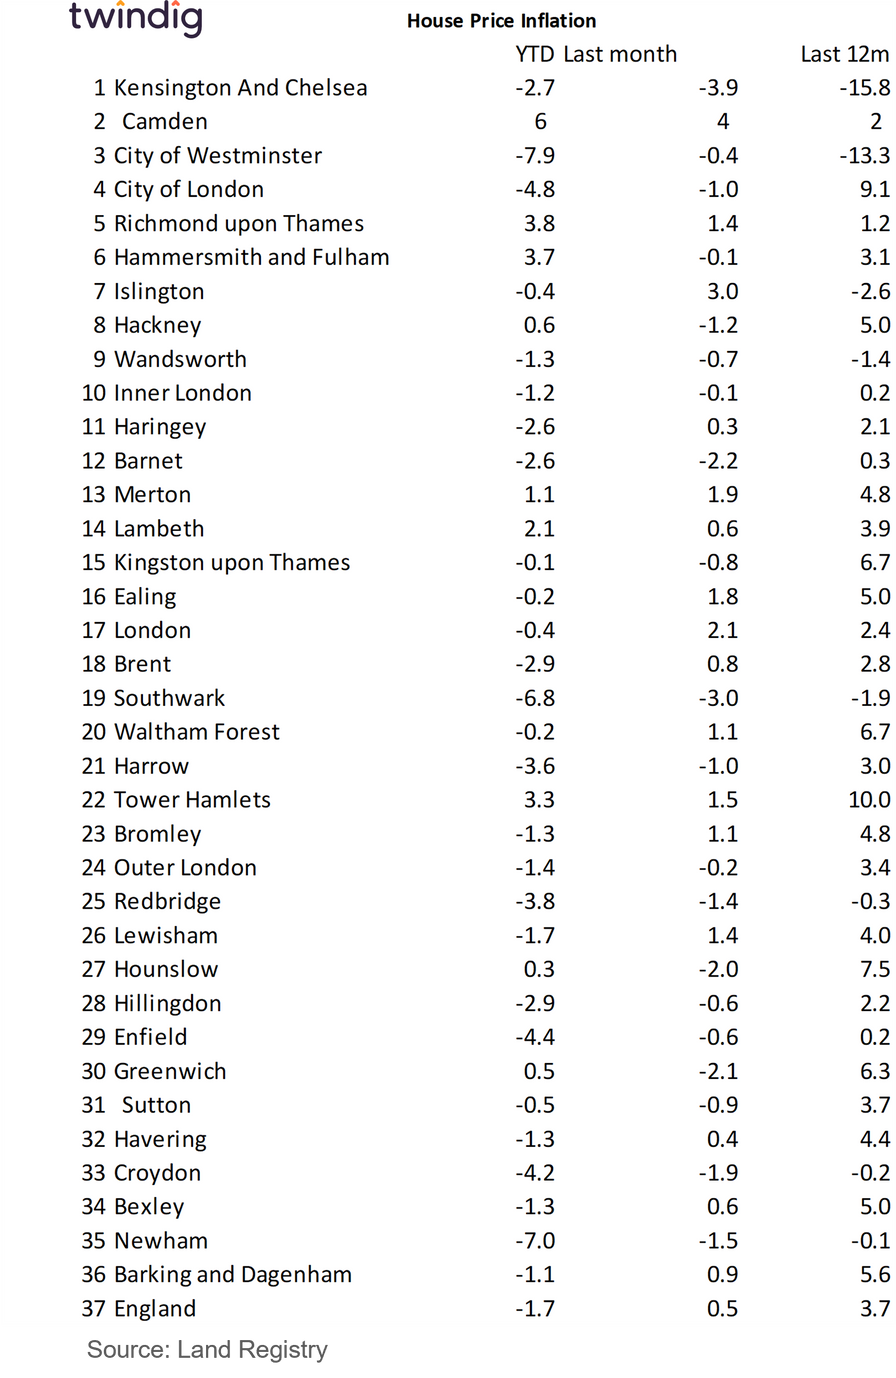 Table showing london house price changes in London last month and last year by london borough twindig anthony codling